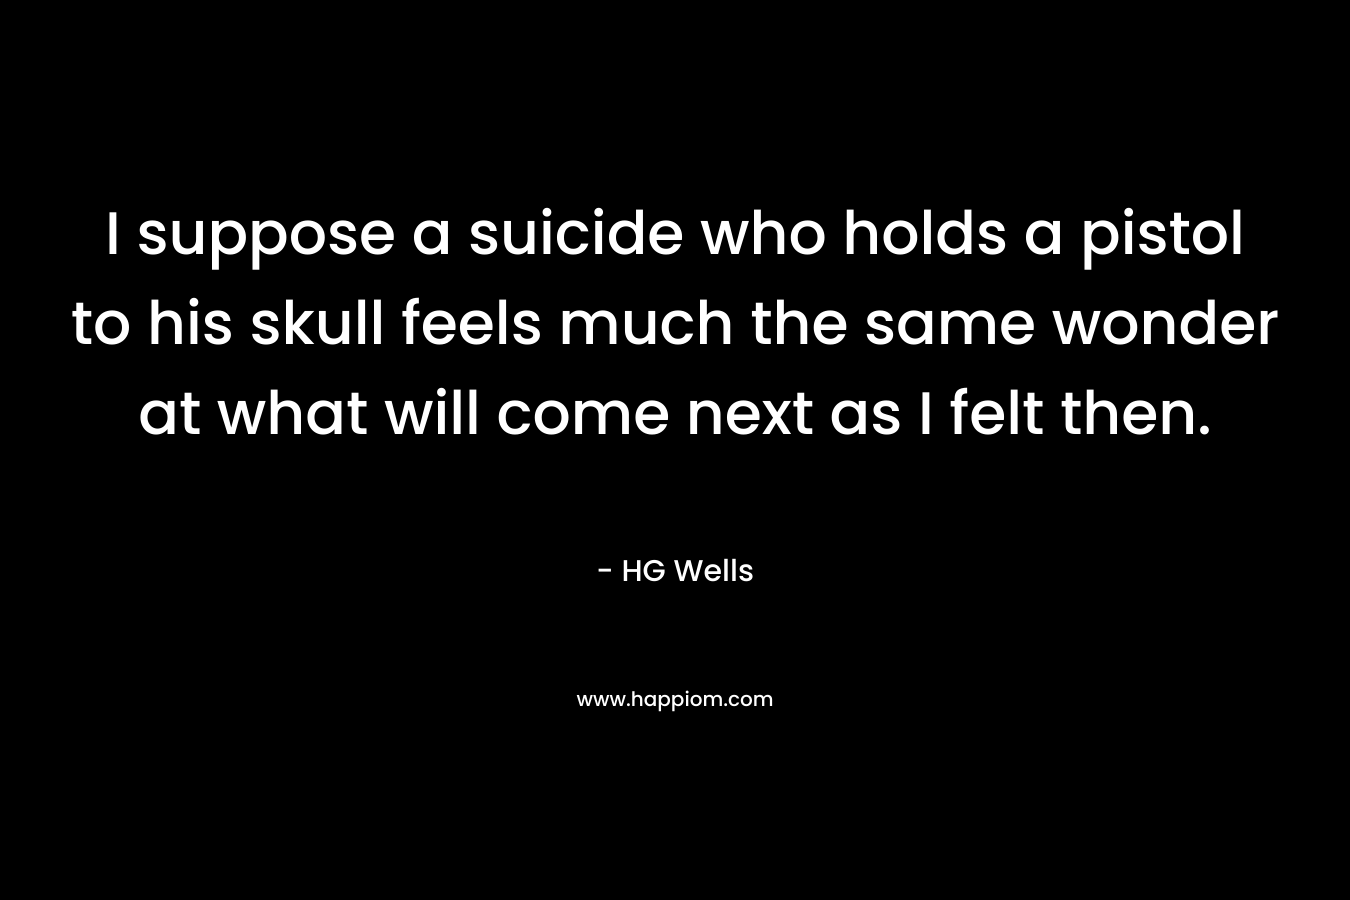 I suppose a suicide who holds a pistol to his skull feels much the same wonder at what will come next as I felt then. – HG Wells